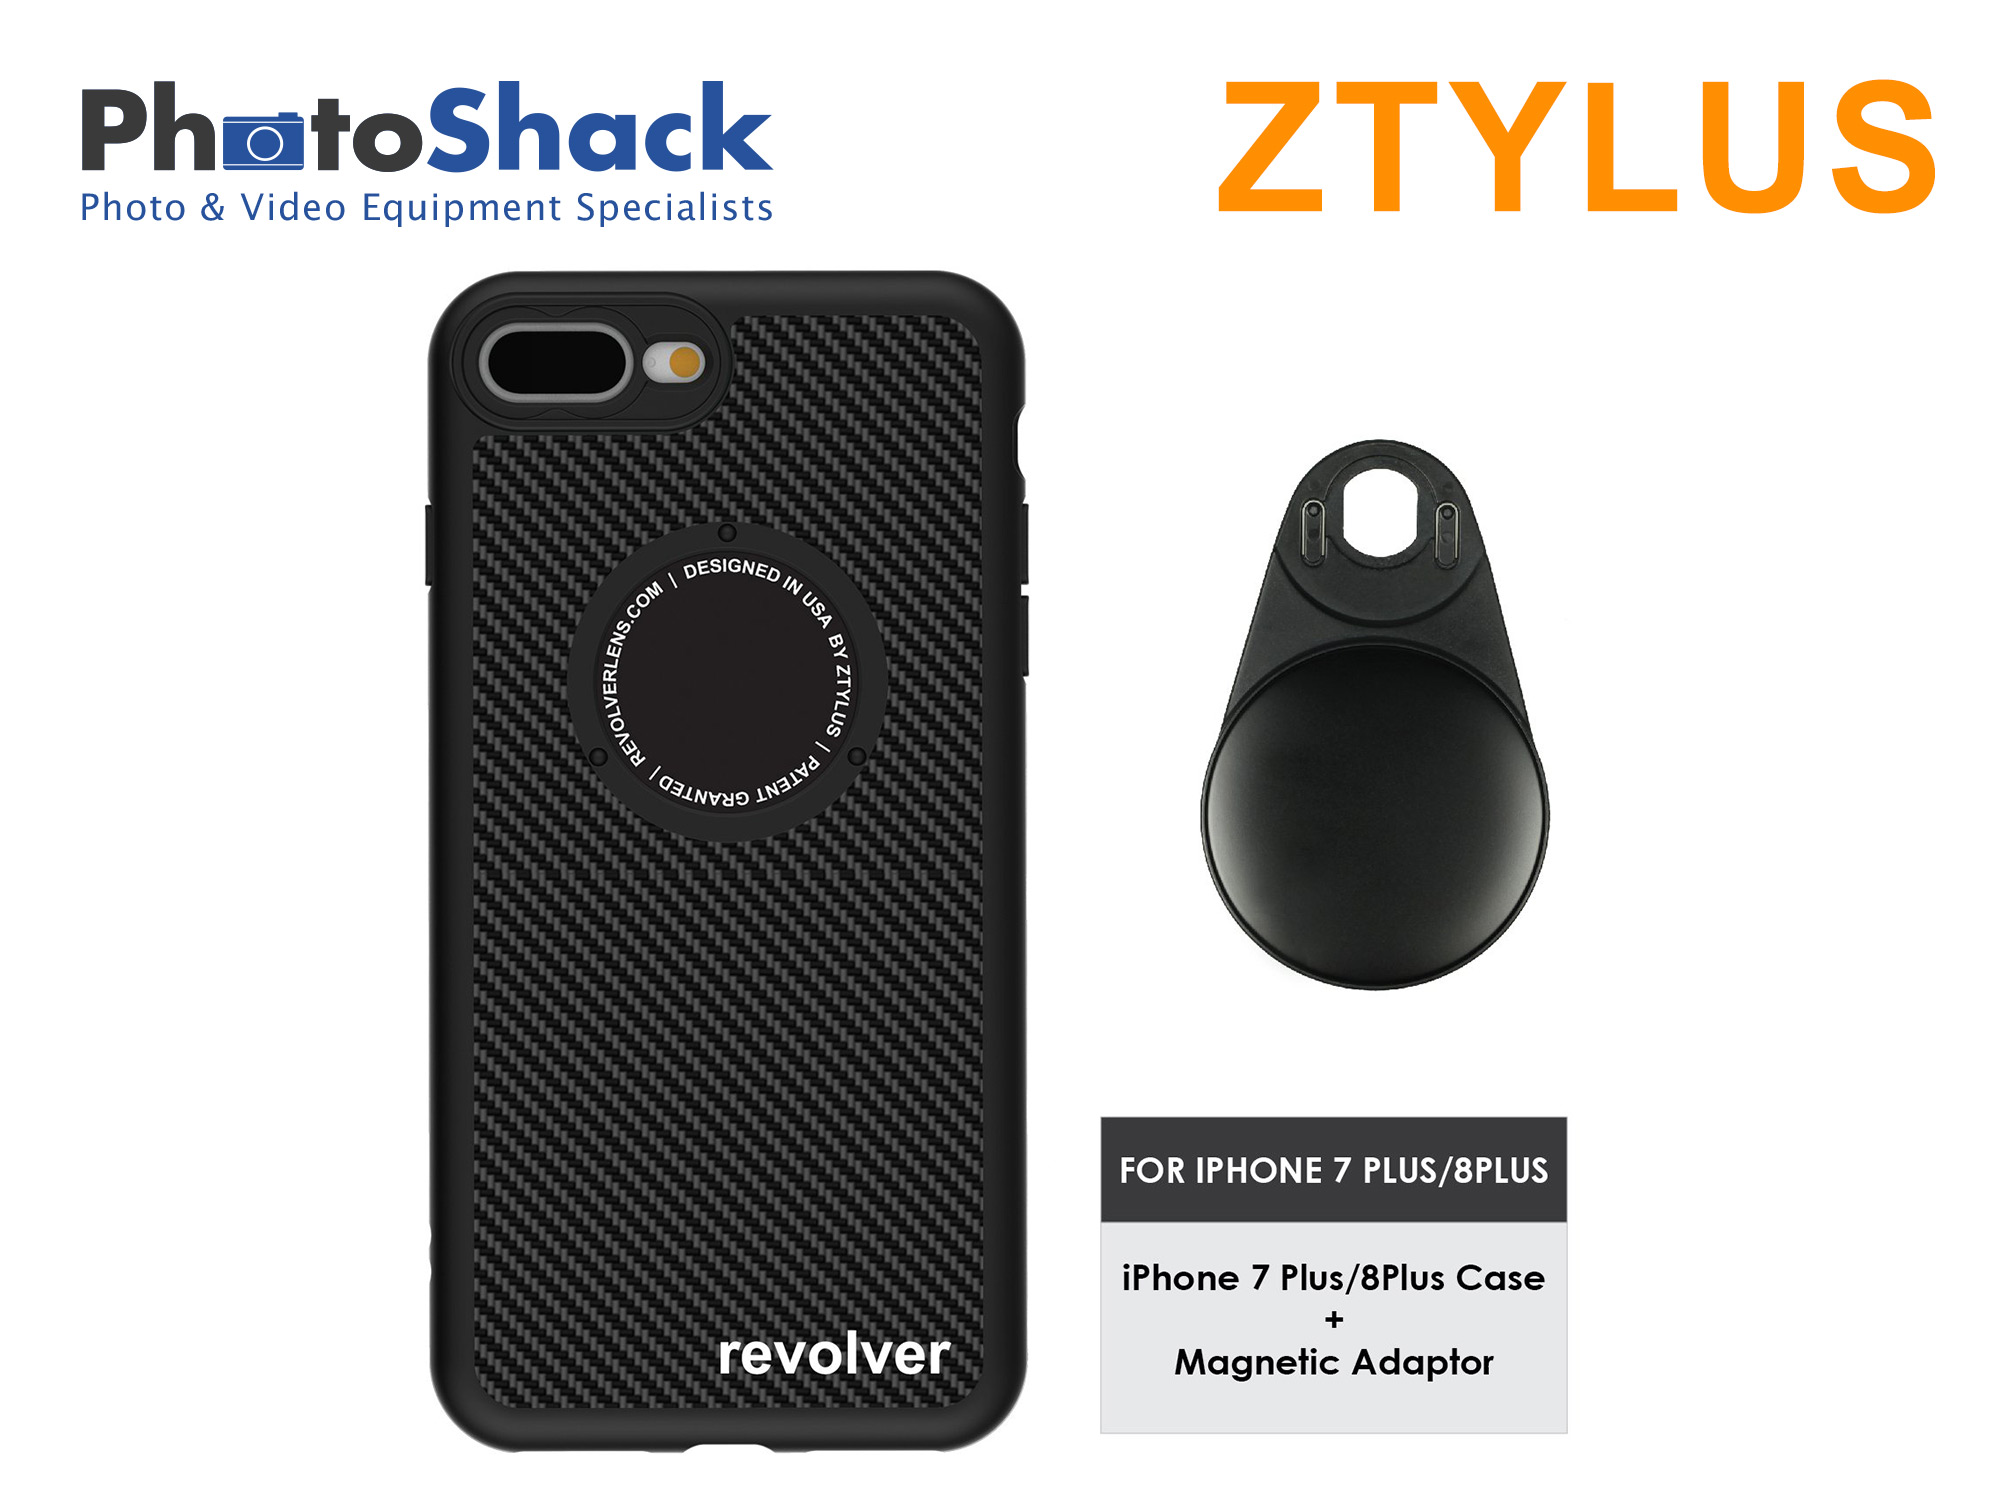 Ztylus iPhone Case (carbon fiber) for iPhone 7+ 7P / 8+ 8P and Magnetic Adapter